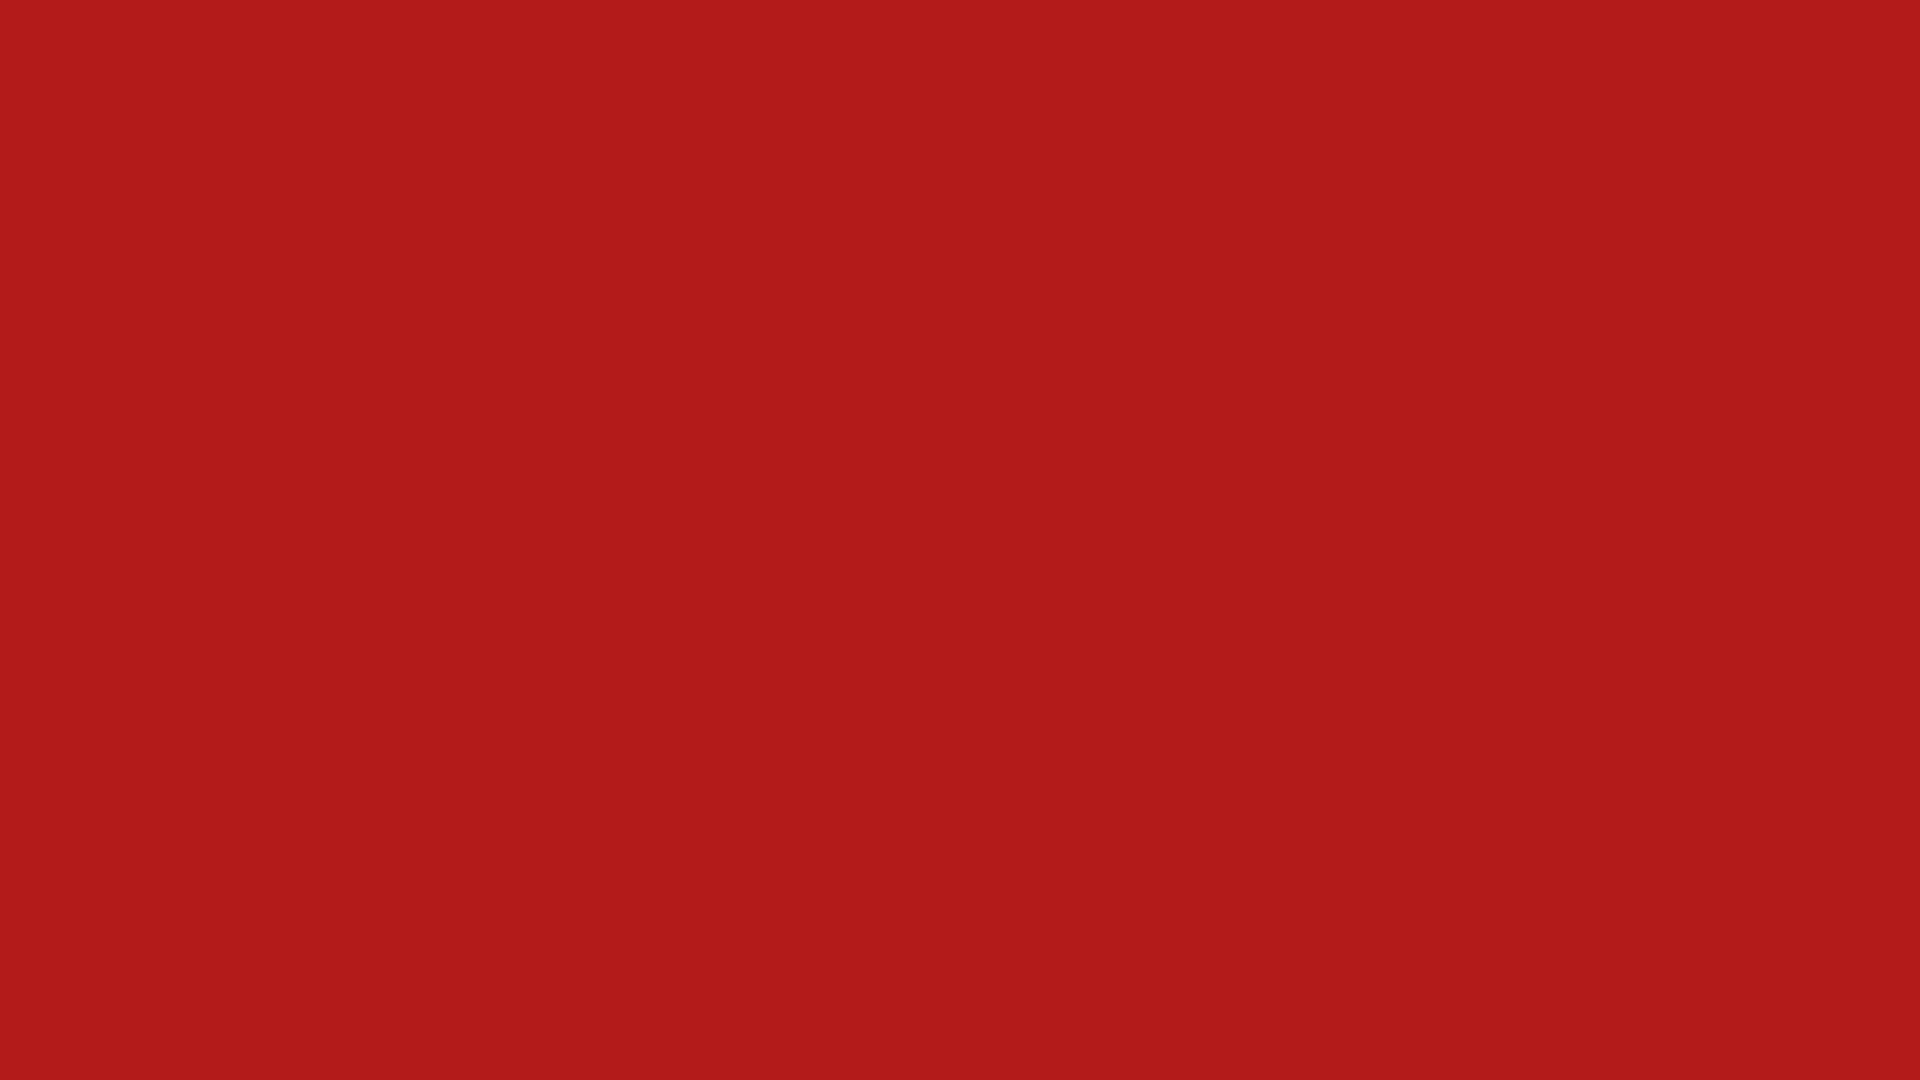 1920x1080 Cornell Red Solid Color Background